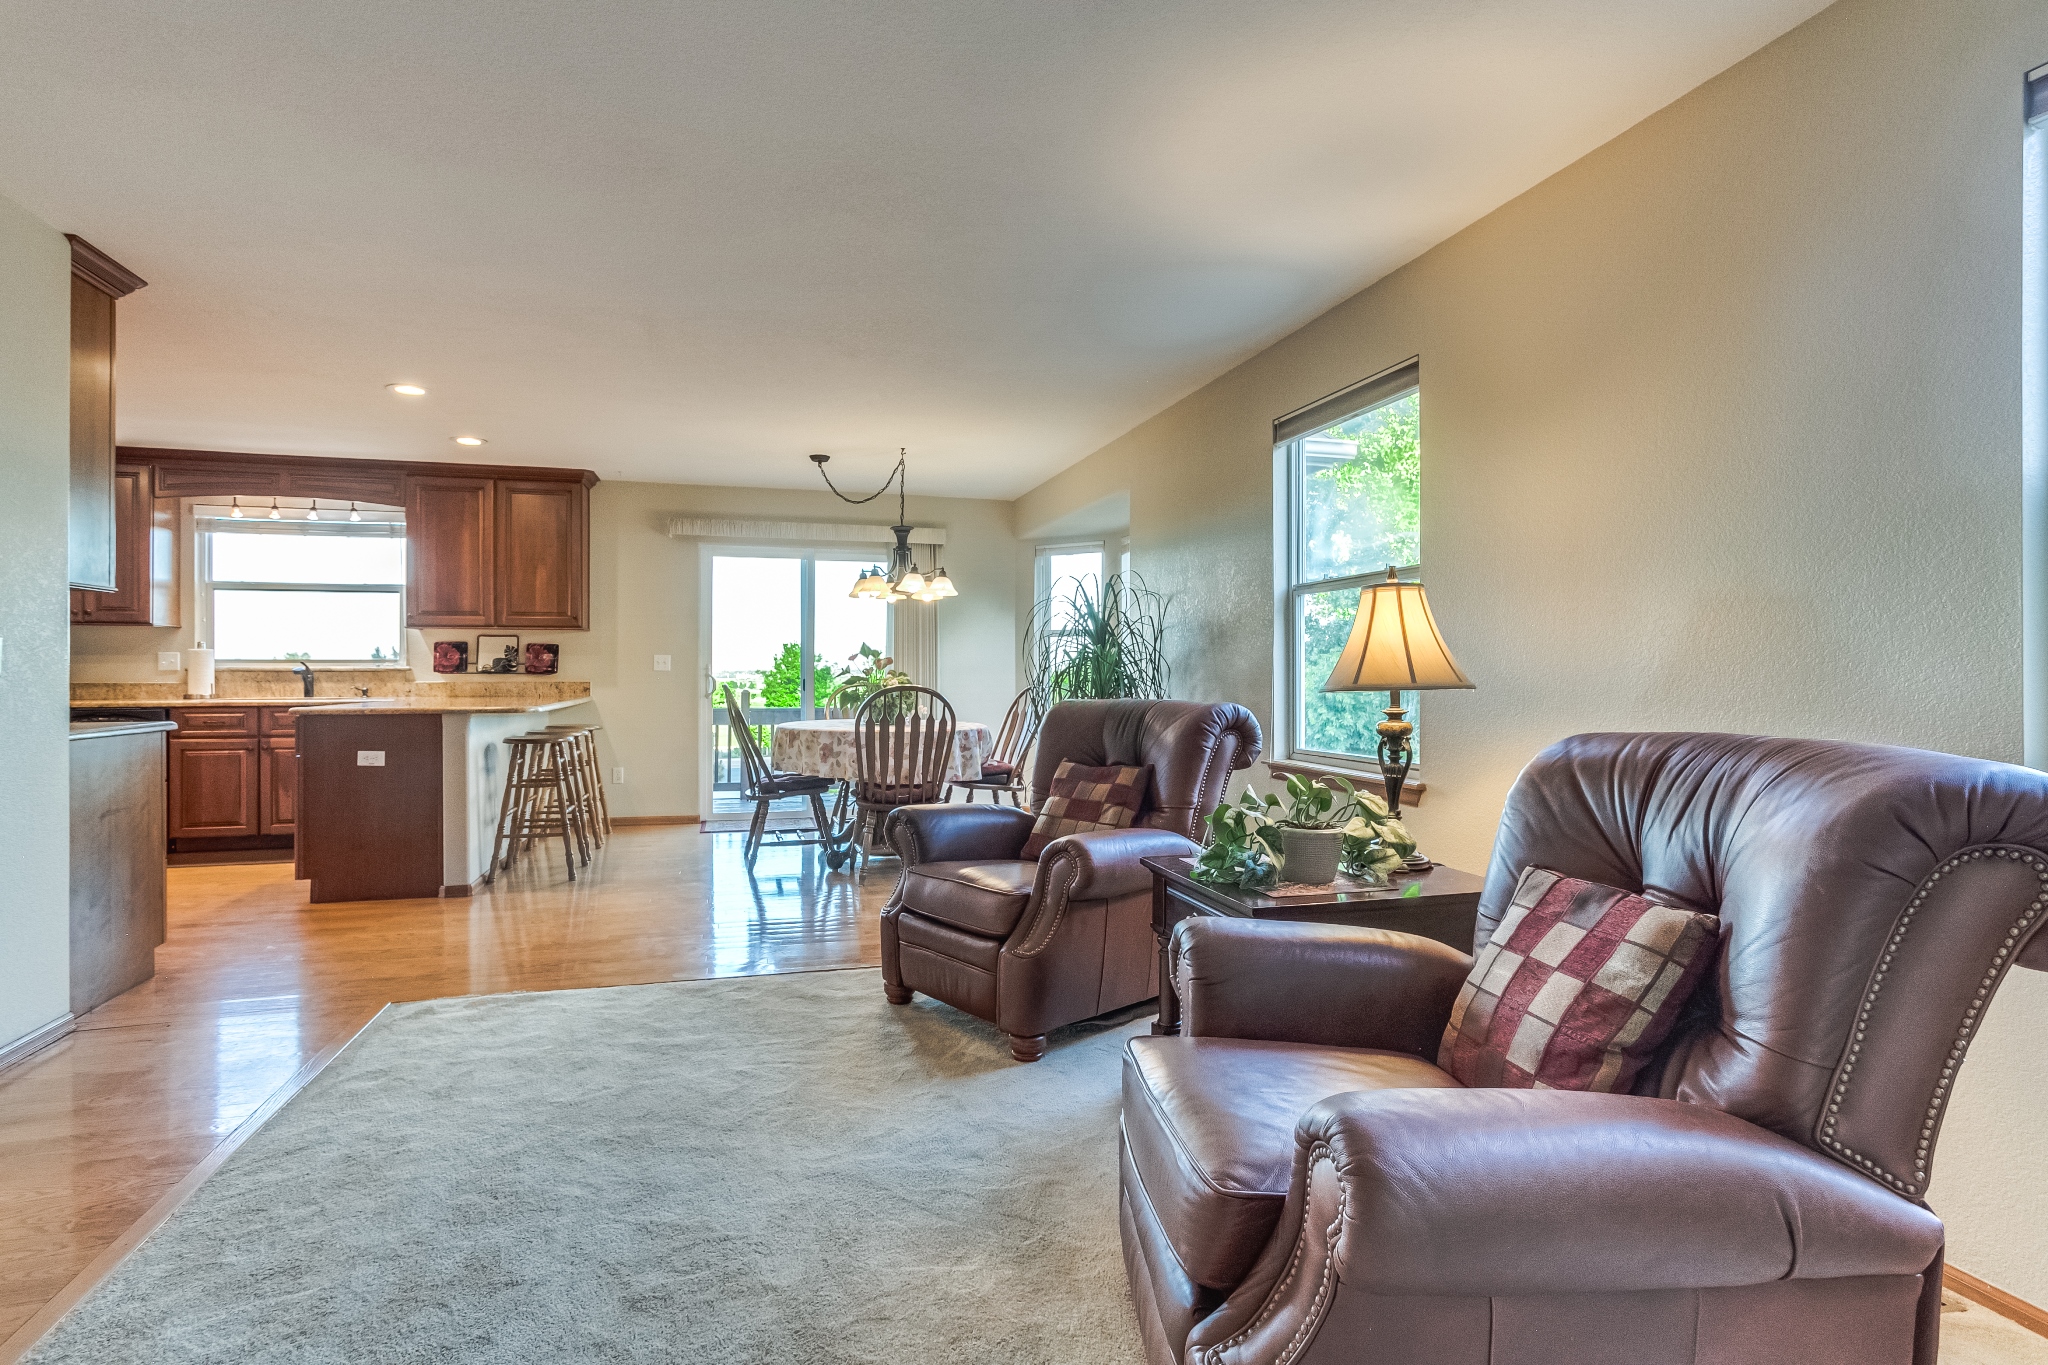 REAL ESTATE LISTING: 1280 Elmwood Ct Broomfield Kitchen Nook and Family Room